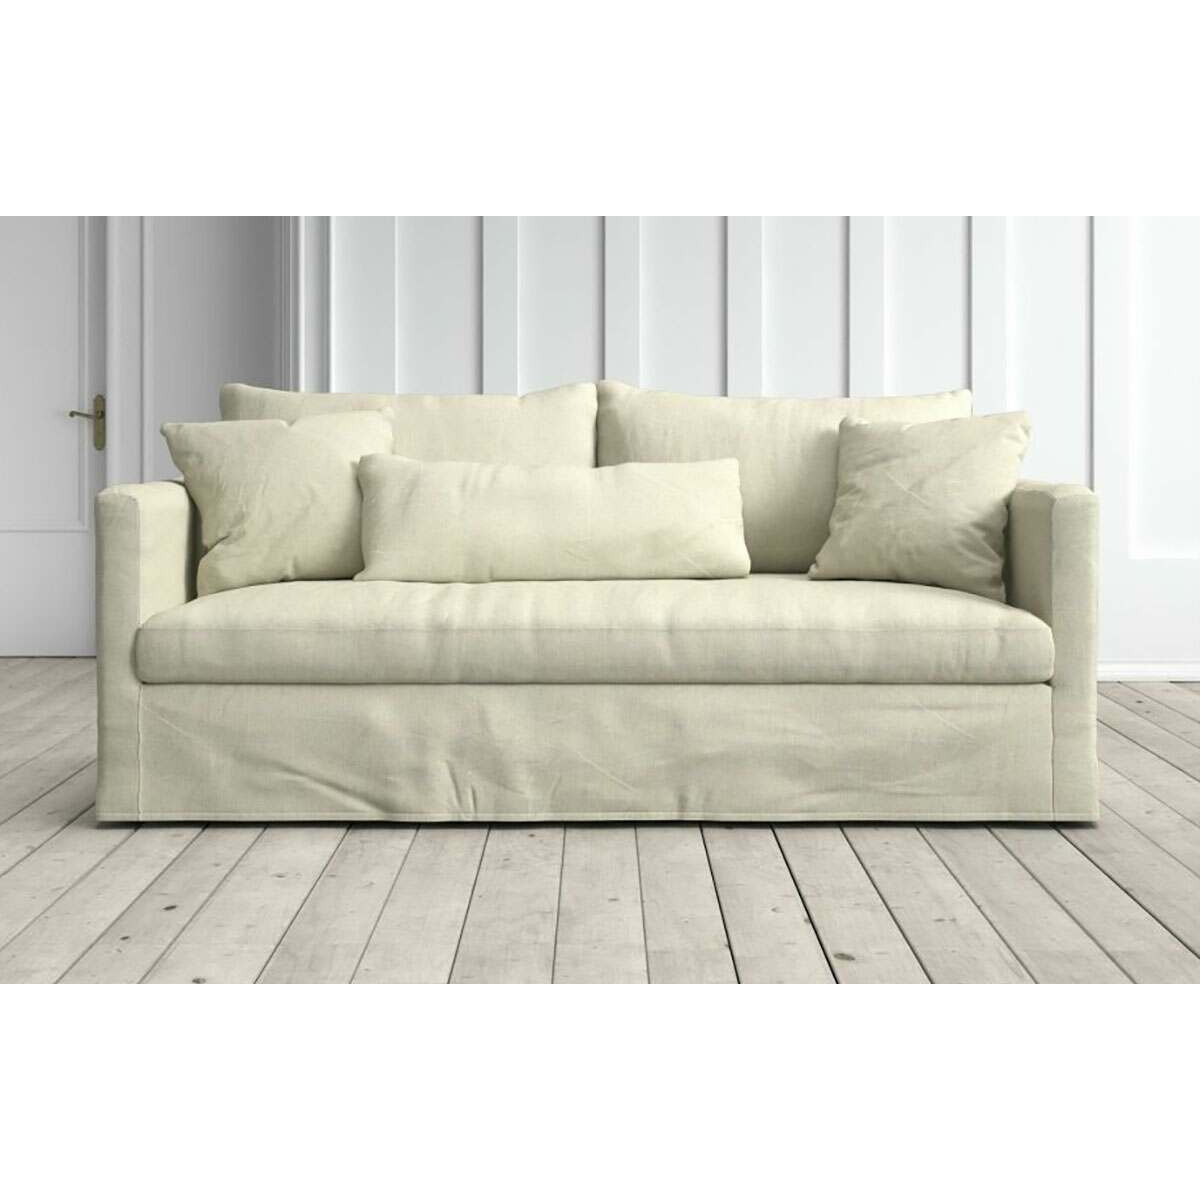 Graham and Green Clementine 2 Seater Sofa